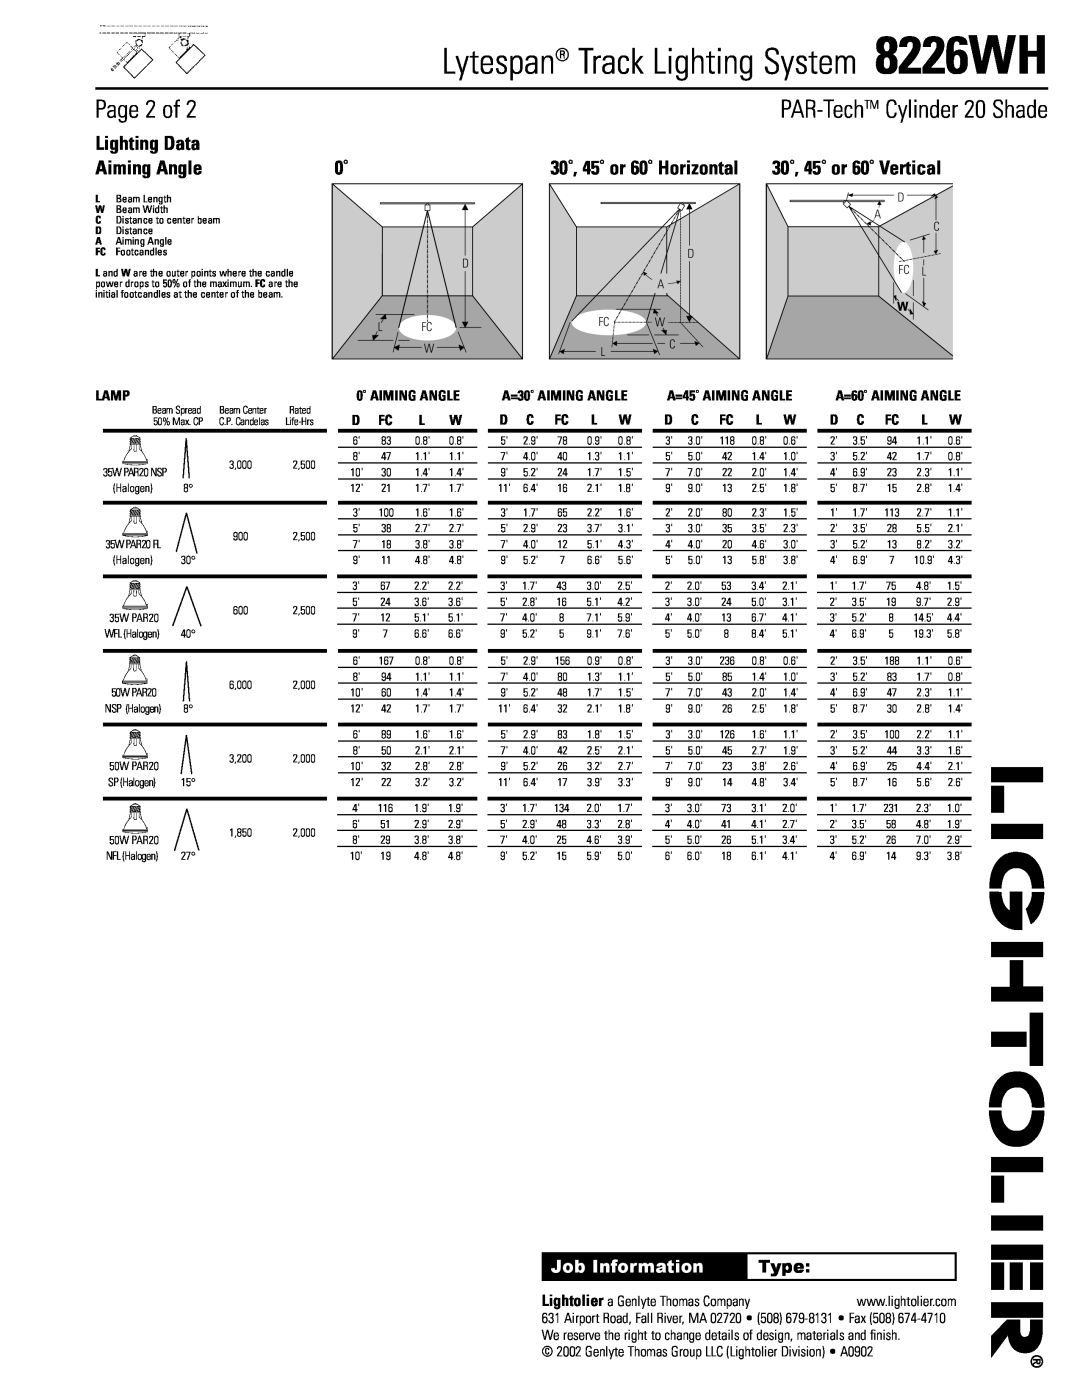 Lightolier 8226WH Page 2 of, PAR-TechTM Cylinder 20 Shade, Lighting Data, Aiming Angle, 30˚, 45˚ or 60˚ Horizontal, Type 